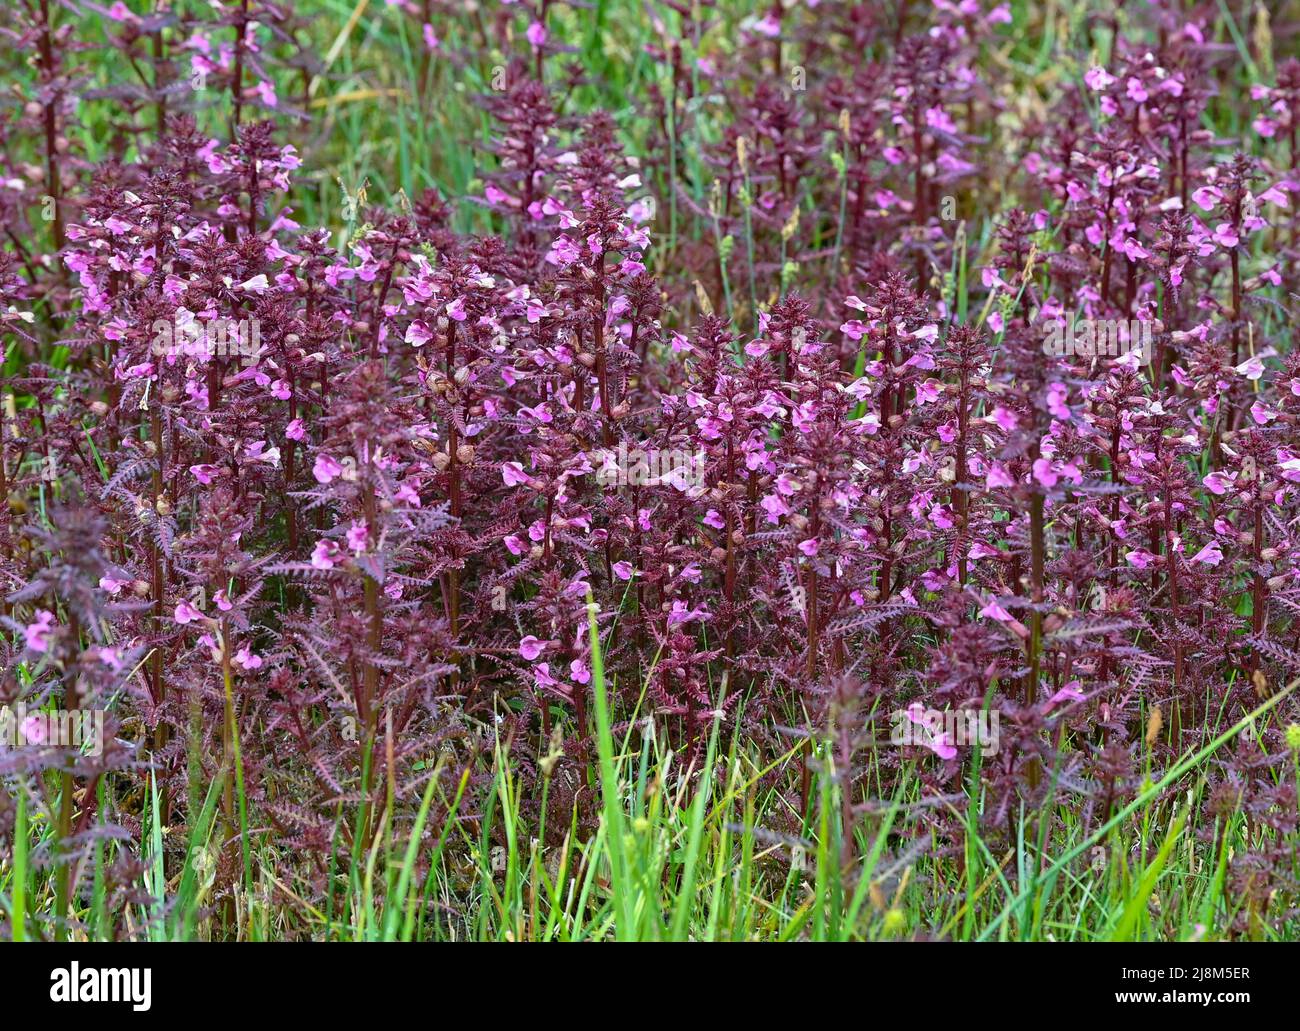 17 May 2022, Brandenburg, Rüdersdorf: A special feature in the state of Brandenburg is the marsh lousewort (Pedicularis palustris), which grows in a wet meadow in the nature reserve and FFH area 'Herrensee, Lange-Dammwiesen and Barnim-Hänge'. In the run-up to the 30th anniversary of the EU Fauna-Flora-Habitat Directive (FFH) on May 21, the Brandenburg Environment Minister Vogel (Bündnis 90/Die Grünen), gave the official go-ahead for the Natura 2000 teams in the state of Brandenburg on the same day on site. The nature reserve and FFH area 'Herrensee, Lange-Dammwiesen und Barnim-Hänge' is repres Stock Photo